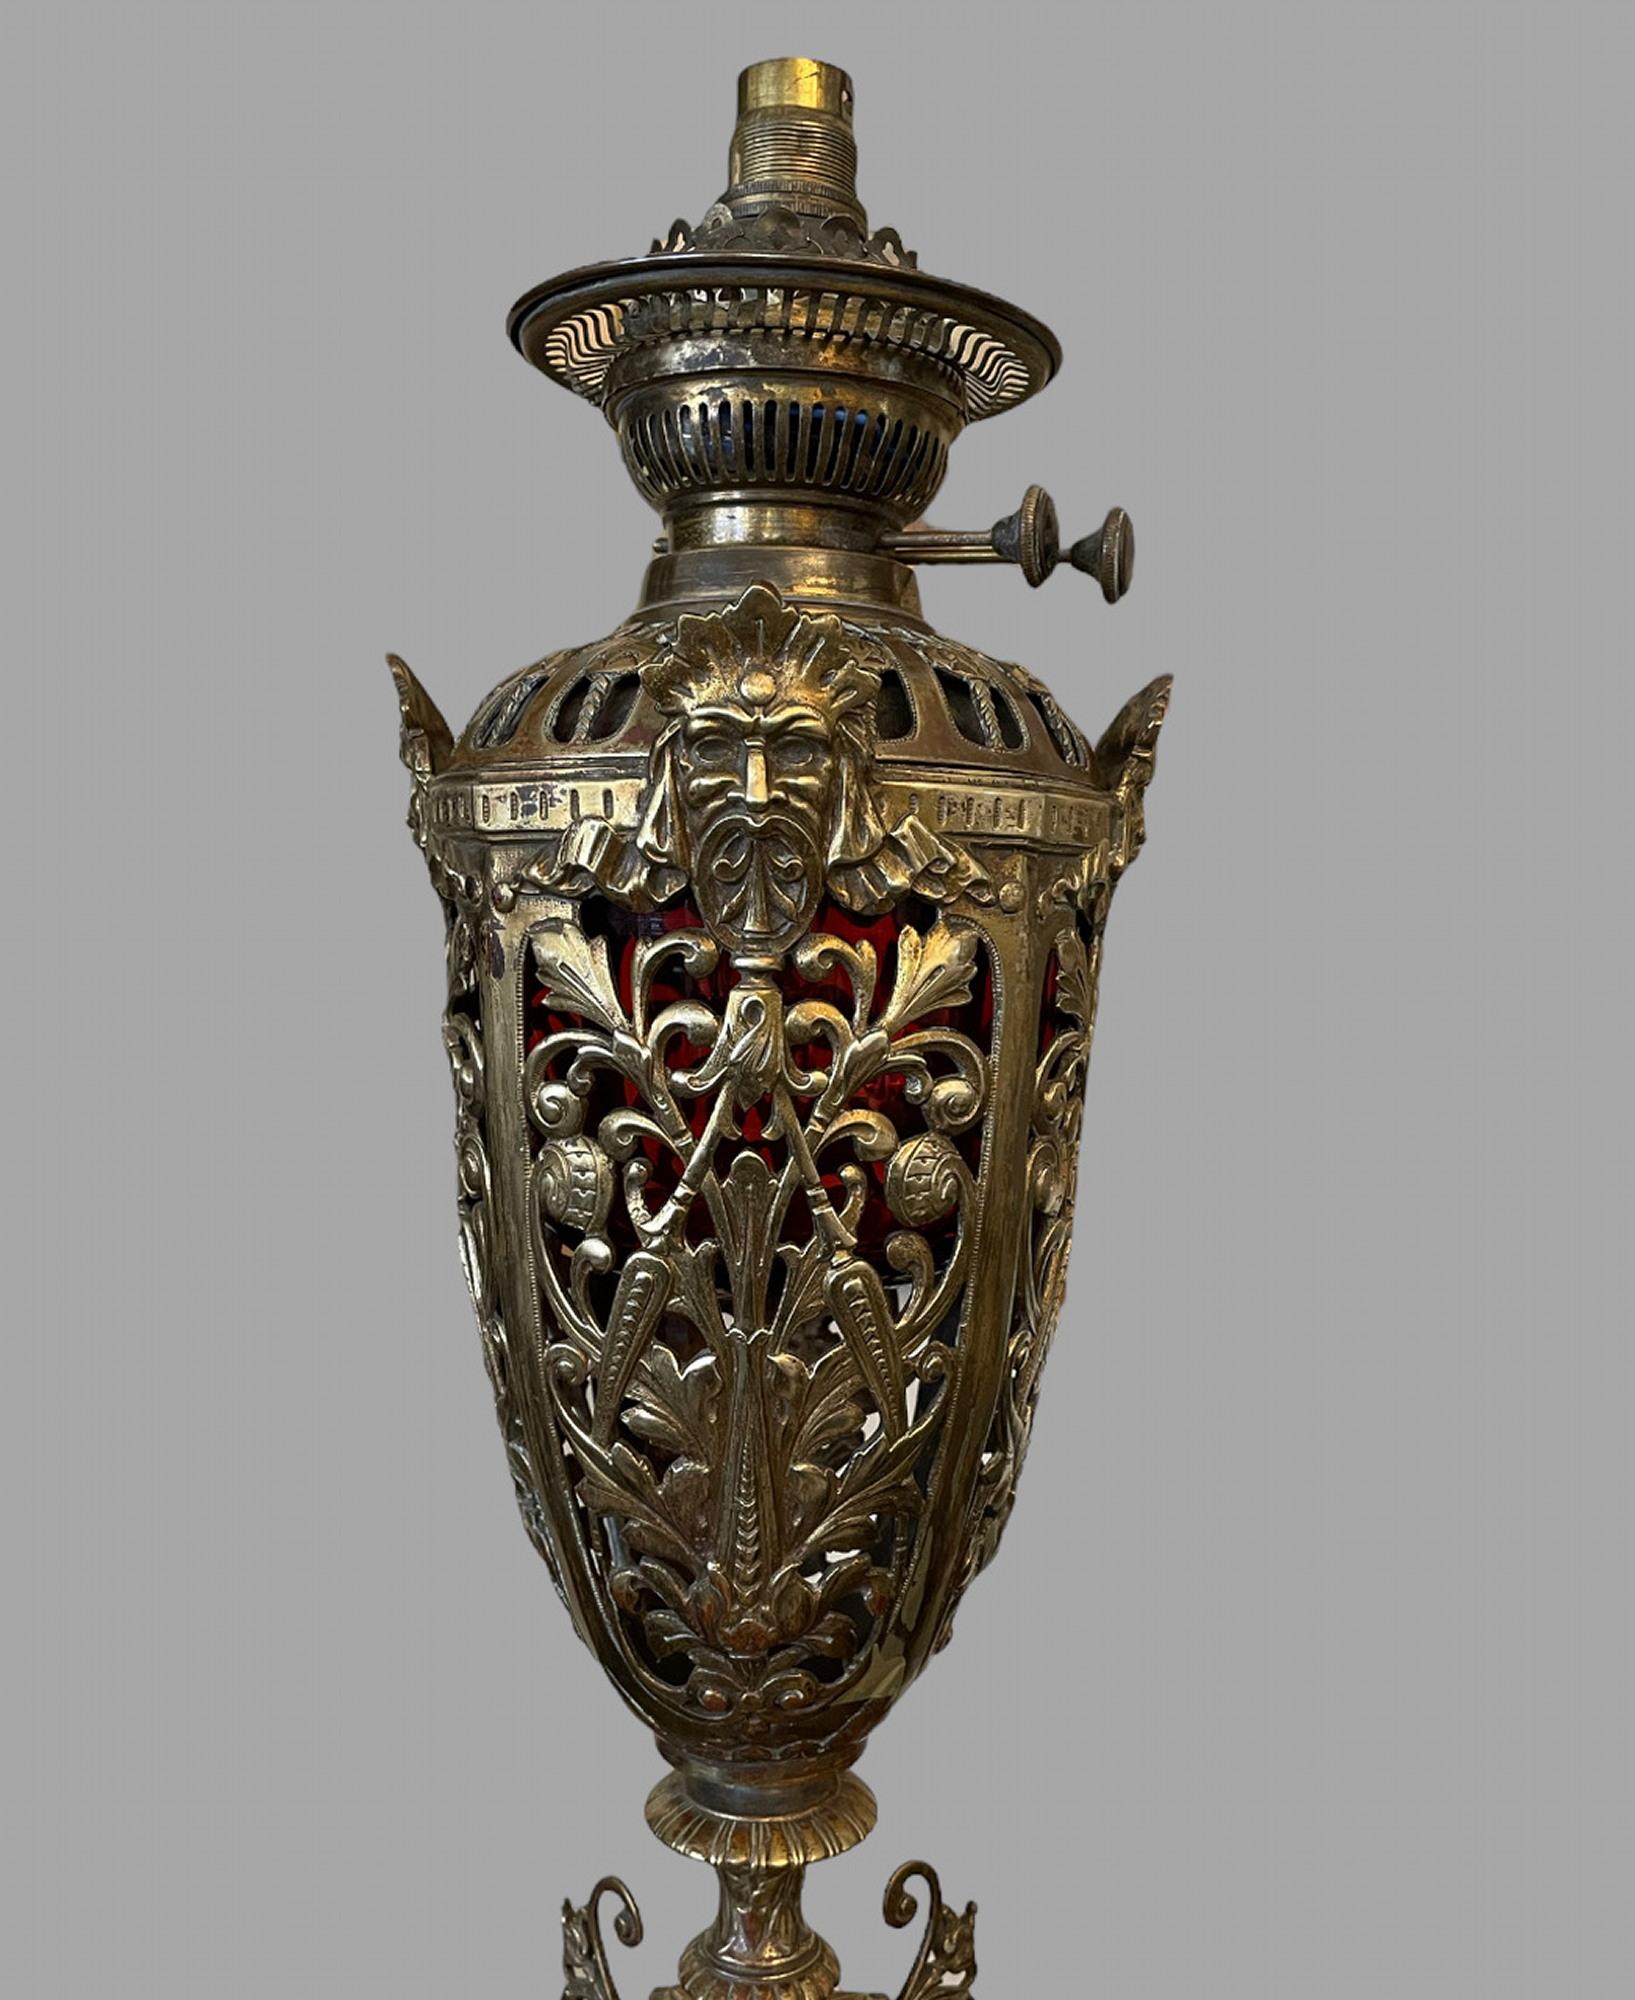 An Ornate Brass and Ormulu Oil Lamp with original reservoir. It has central masks on the square base of the deity Cernounnos who represented prosperity. The upper vase shaped part of the lamp is beautifully wrought and pierced with leaves and